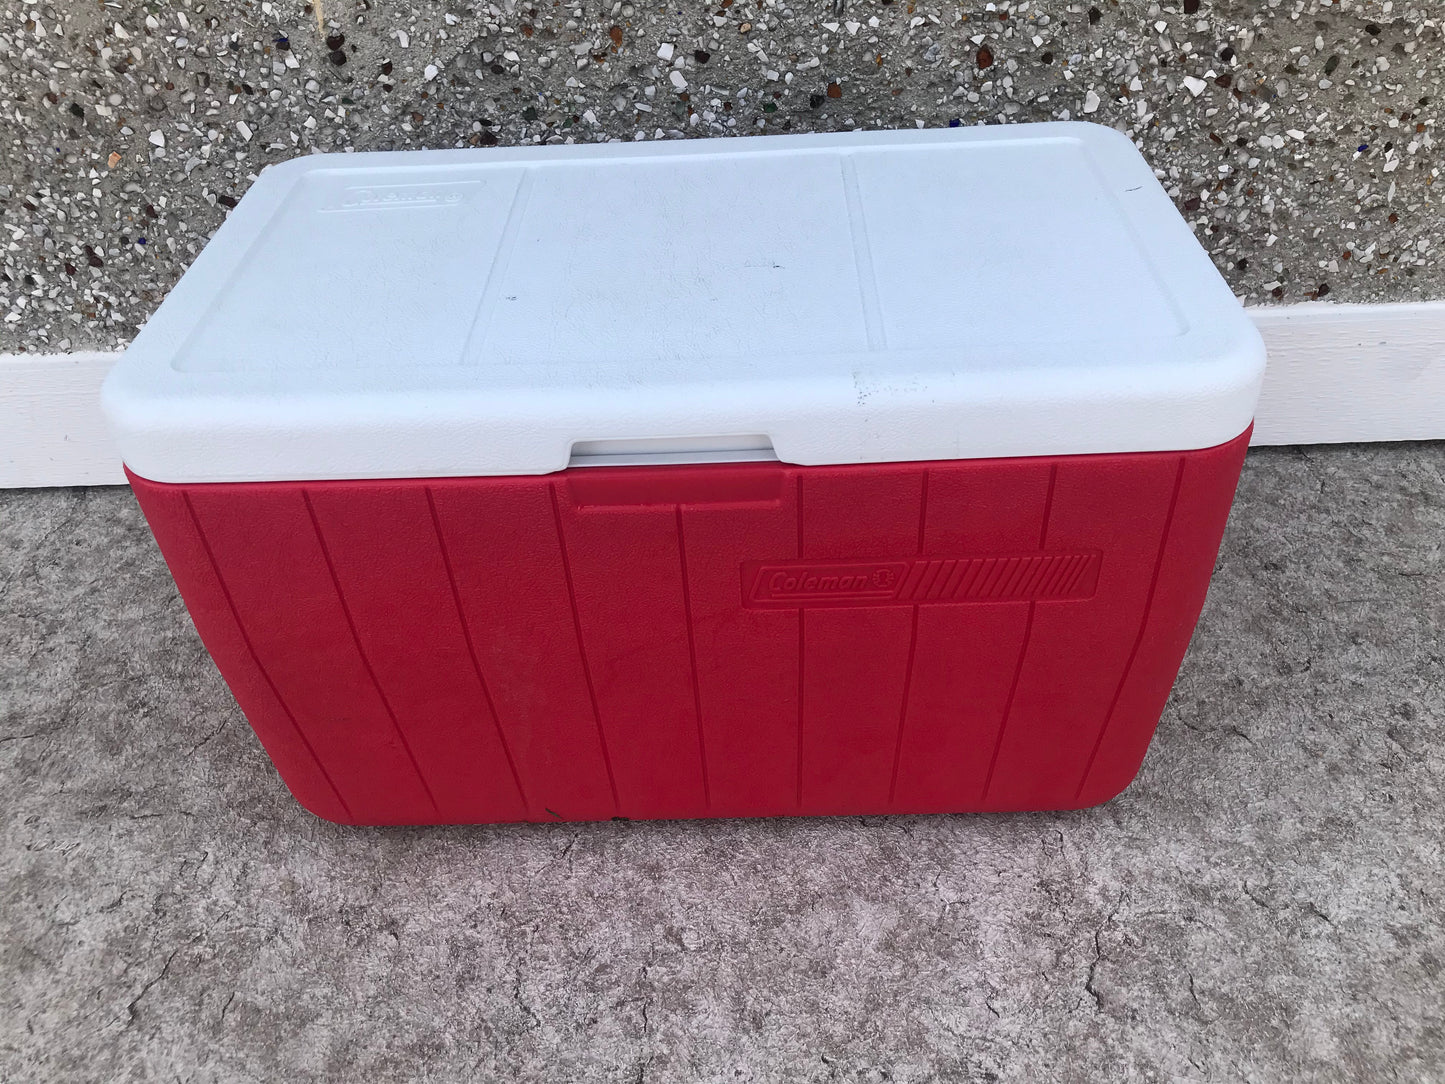 Camping Adventures Cooler Coleman Chest 48 Qt Drain Plug Keeps Ice 3 Days Excellent Red White